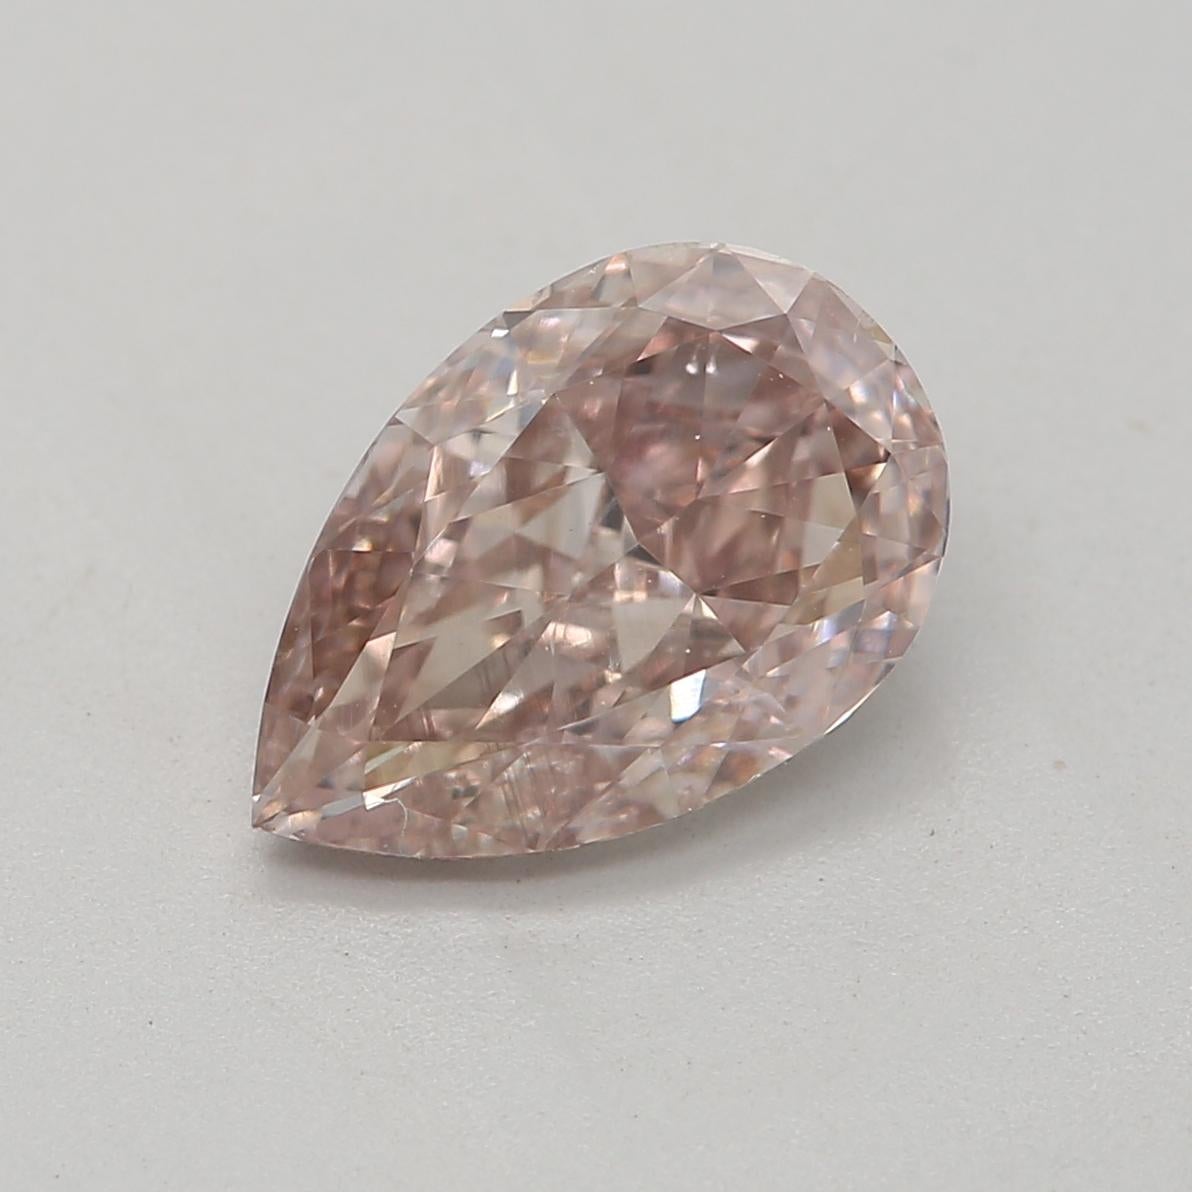 *100% NATURAL FANCY COLOUR DIAMOND*

✪ Diamond Details ✪

➛ Shape: Pear
➛ Colour Grade: Fancy Brown Pink
➛ Carat: 1.01
➛ Clarity: SI1
➛ GIA Certified 

^FEATURES OF THE DIAMOND^

Our Fancy Brown Pink diamond is a rare and unique gemstone that